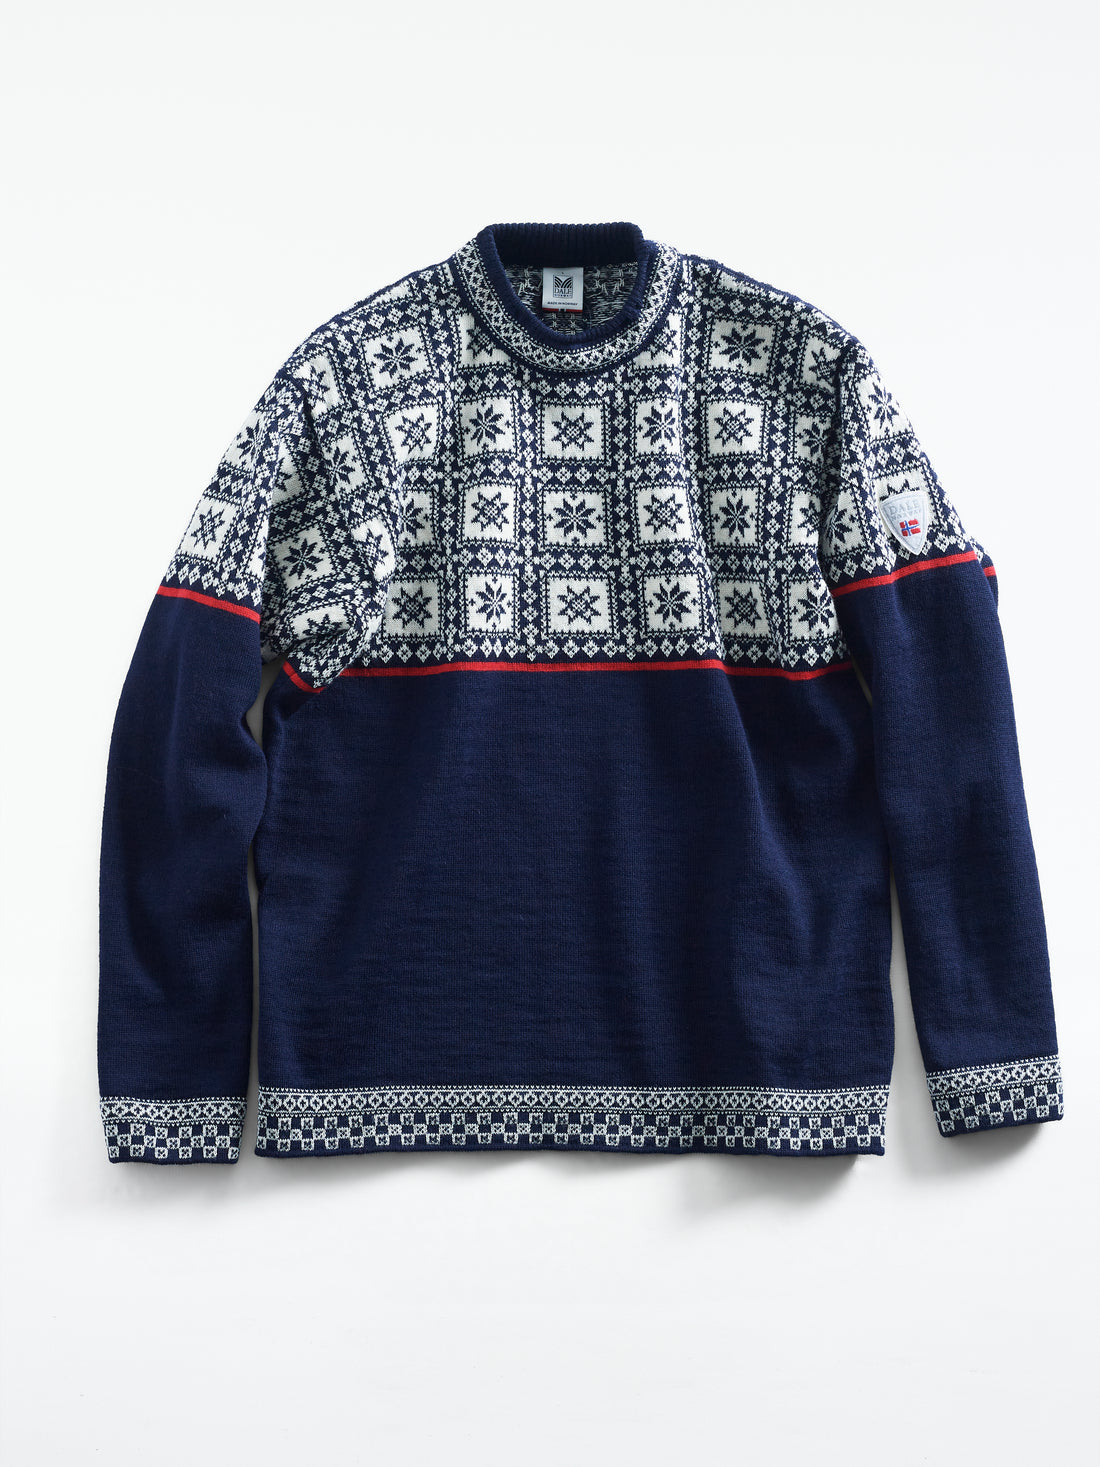 Dale of Norway - Tyssoy Men's Sweater - Navy